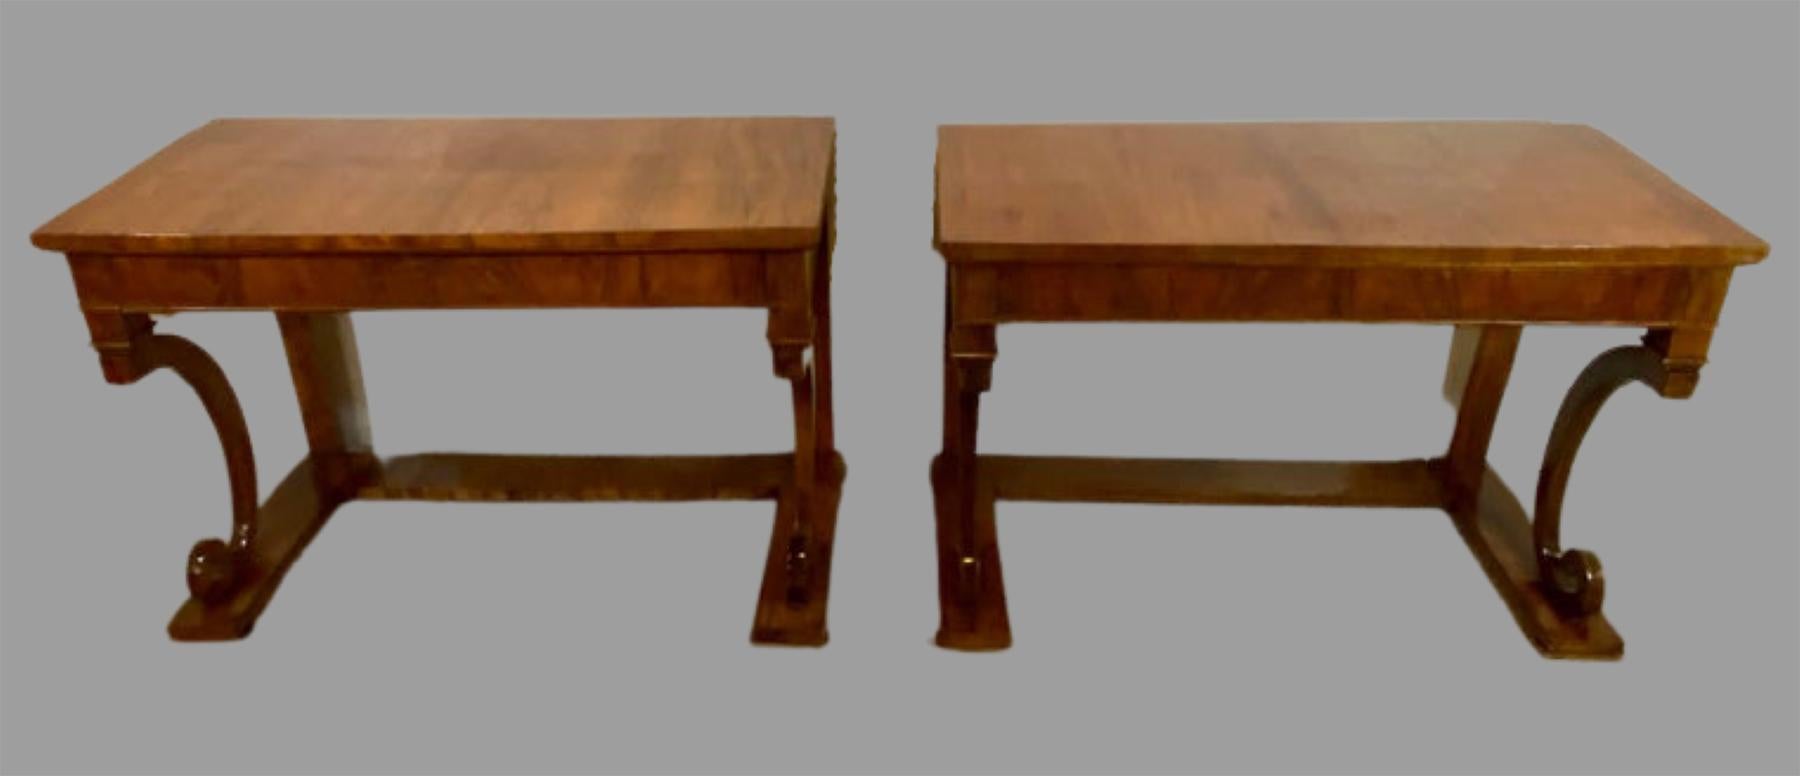 Pair of Empire Period rosewood consoles or pier tables each dating back to the late 18th century. The pair with deep C scroll column support sides sitting on a flat base leading to a single large drawer under a finely patinated table top. The pair